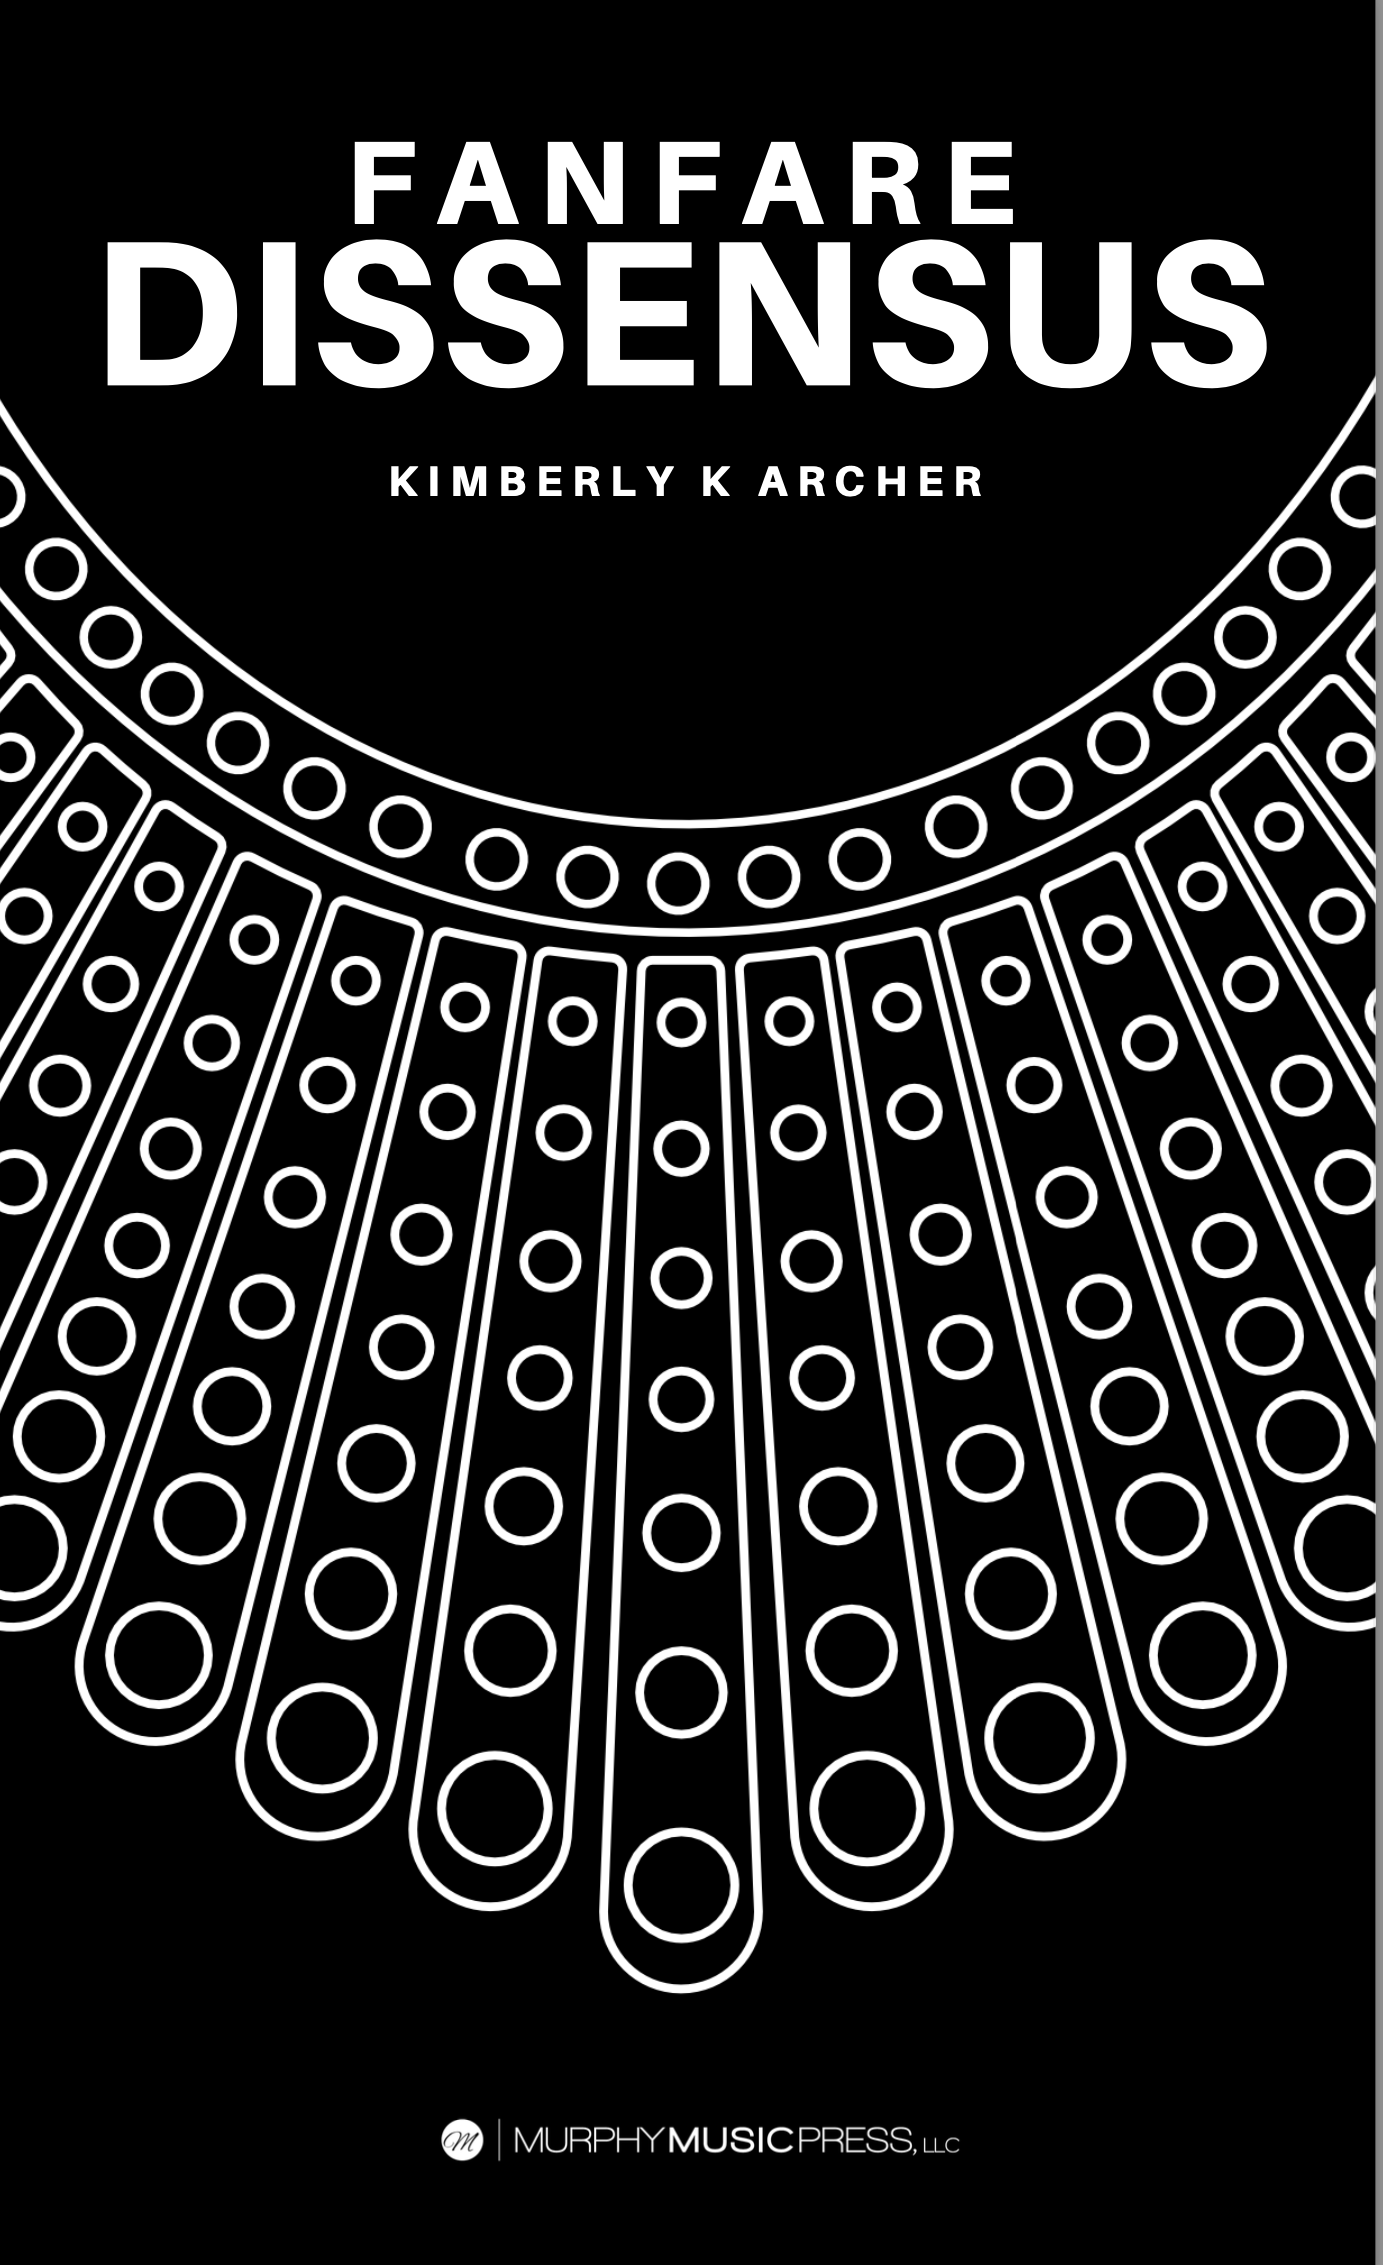 Fanfare Dissensus (Score Only) by Kimberly Archer